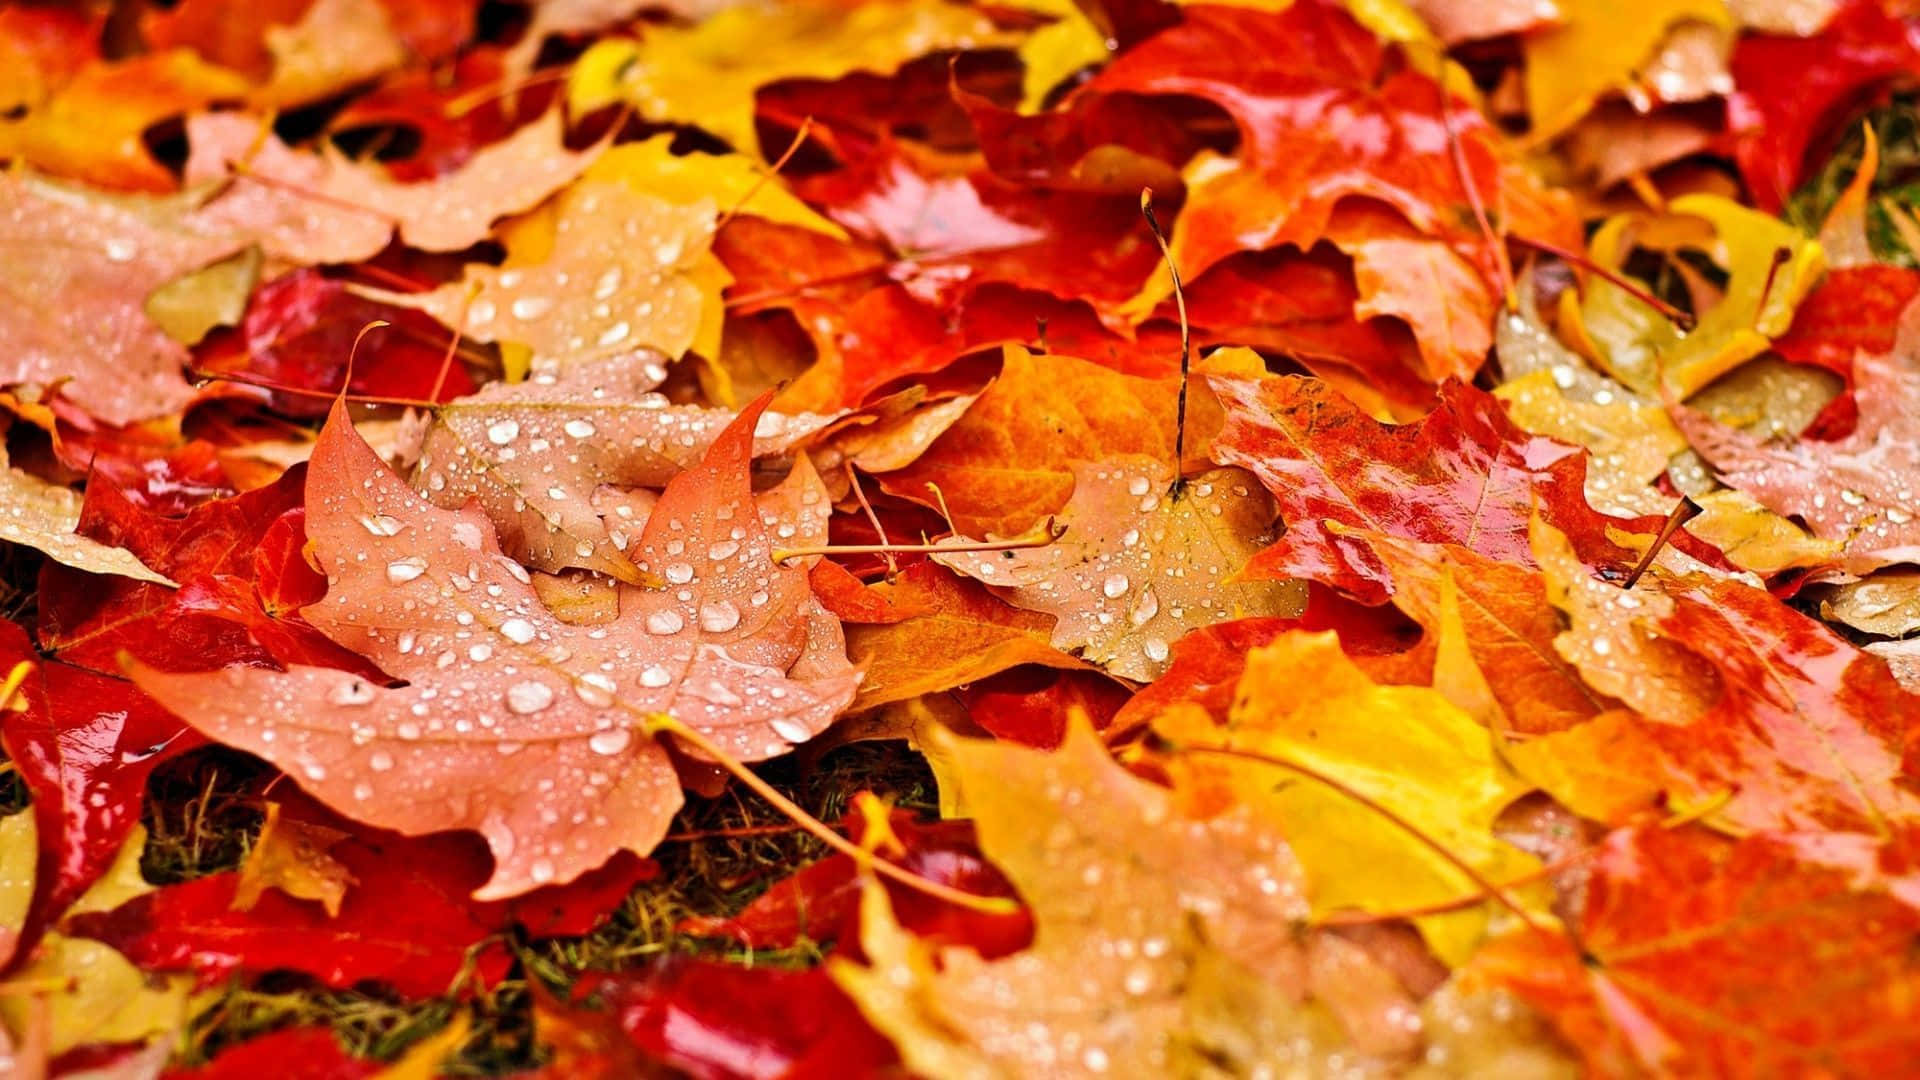 Enjoy the beauty of fall with this stunning autumn leaf Wallpaper